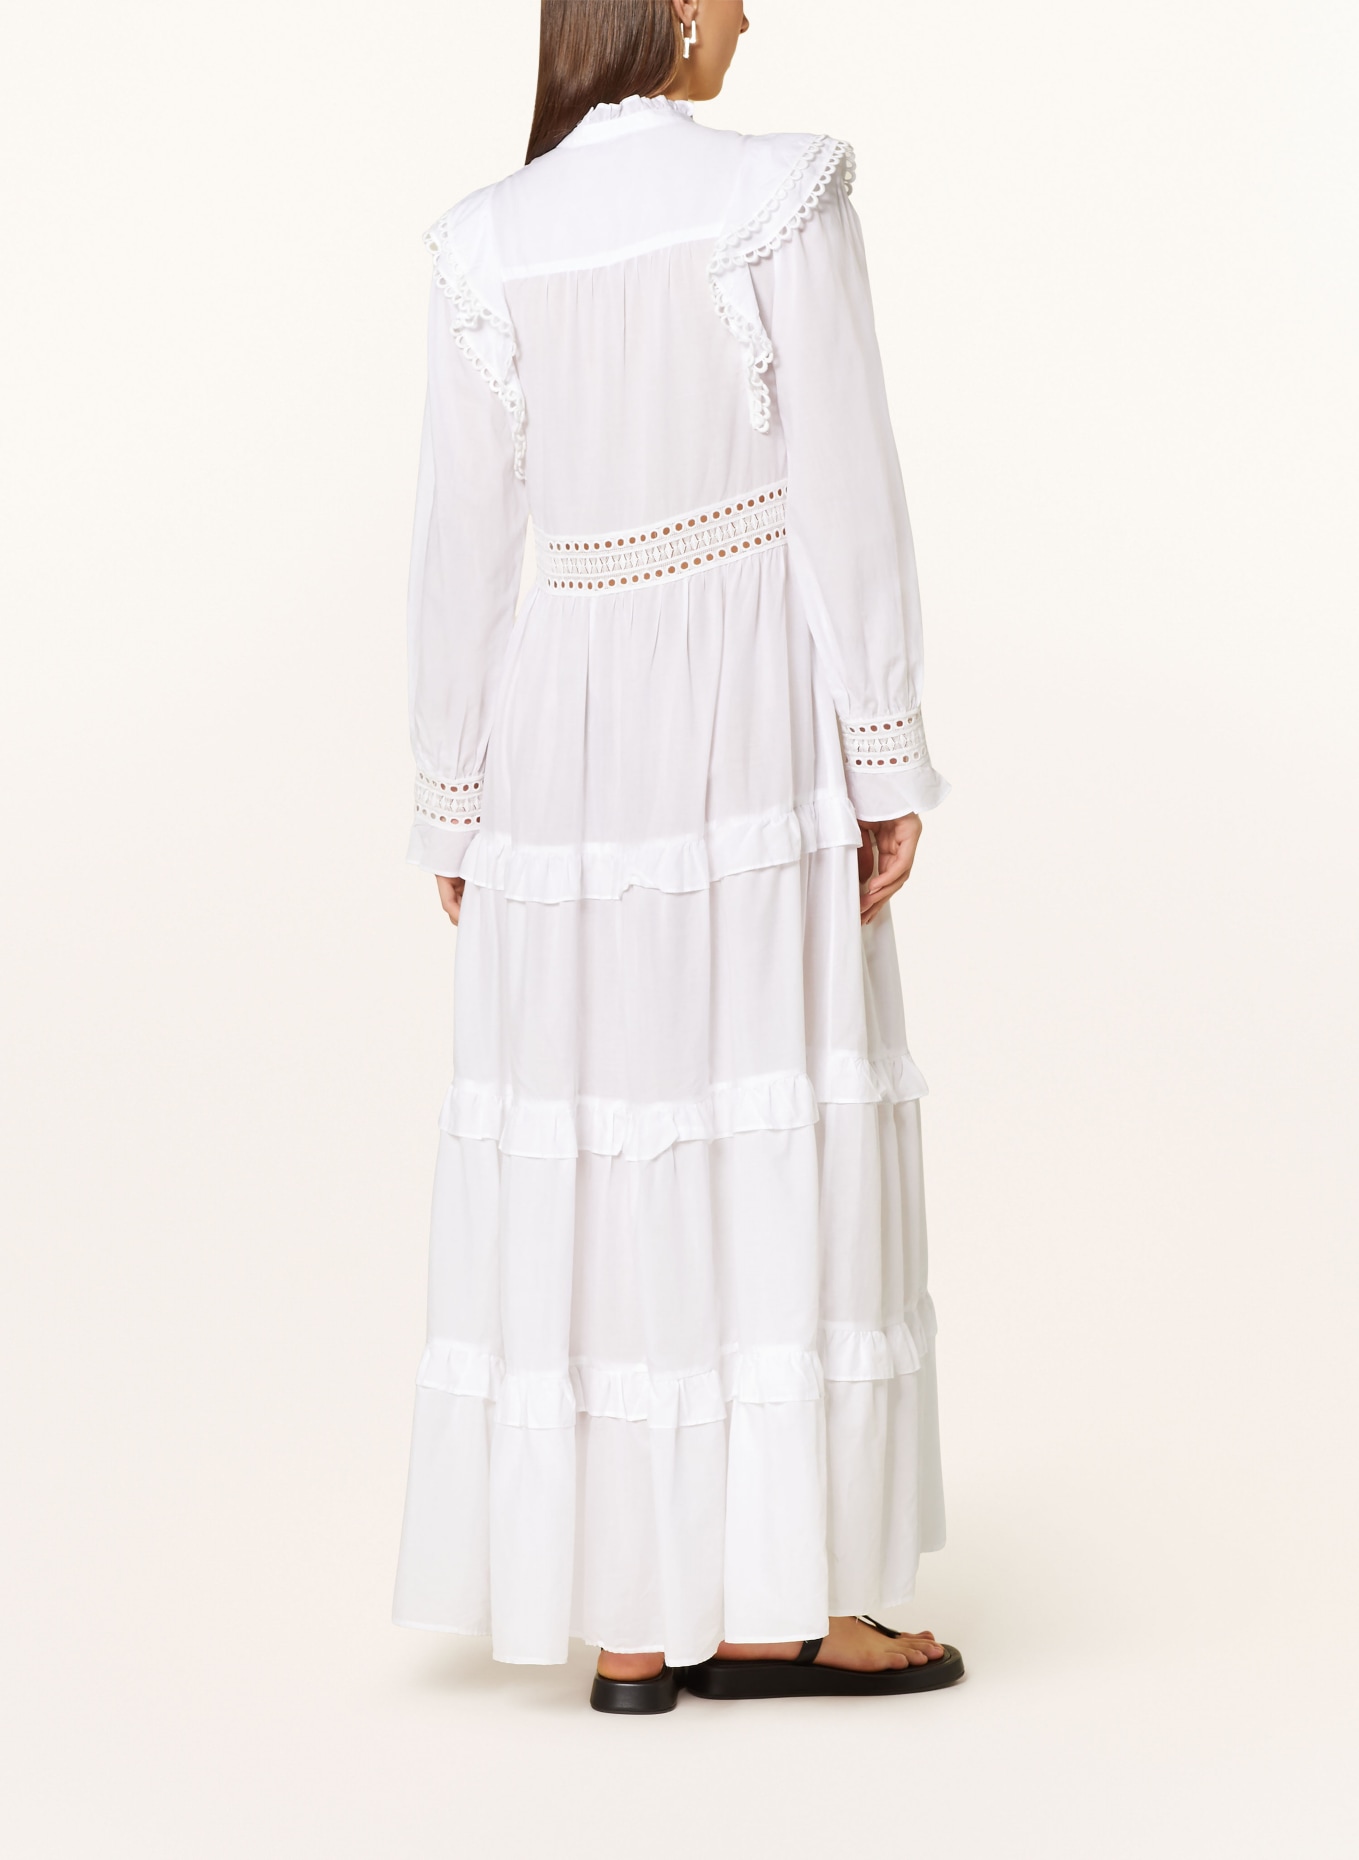 IVY OAK Shirt dress DENISA with broderie anglaise and ruffles, Color: WHITE (Image 3)